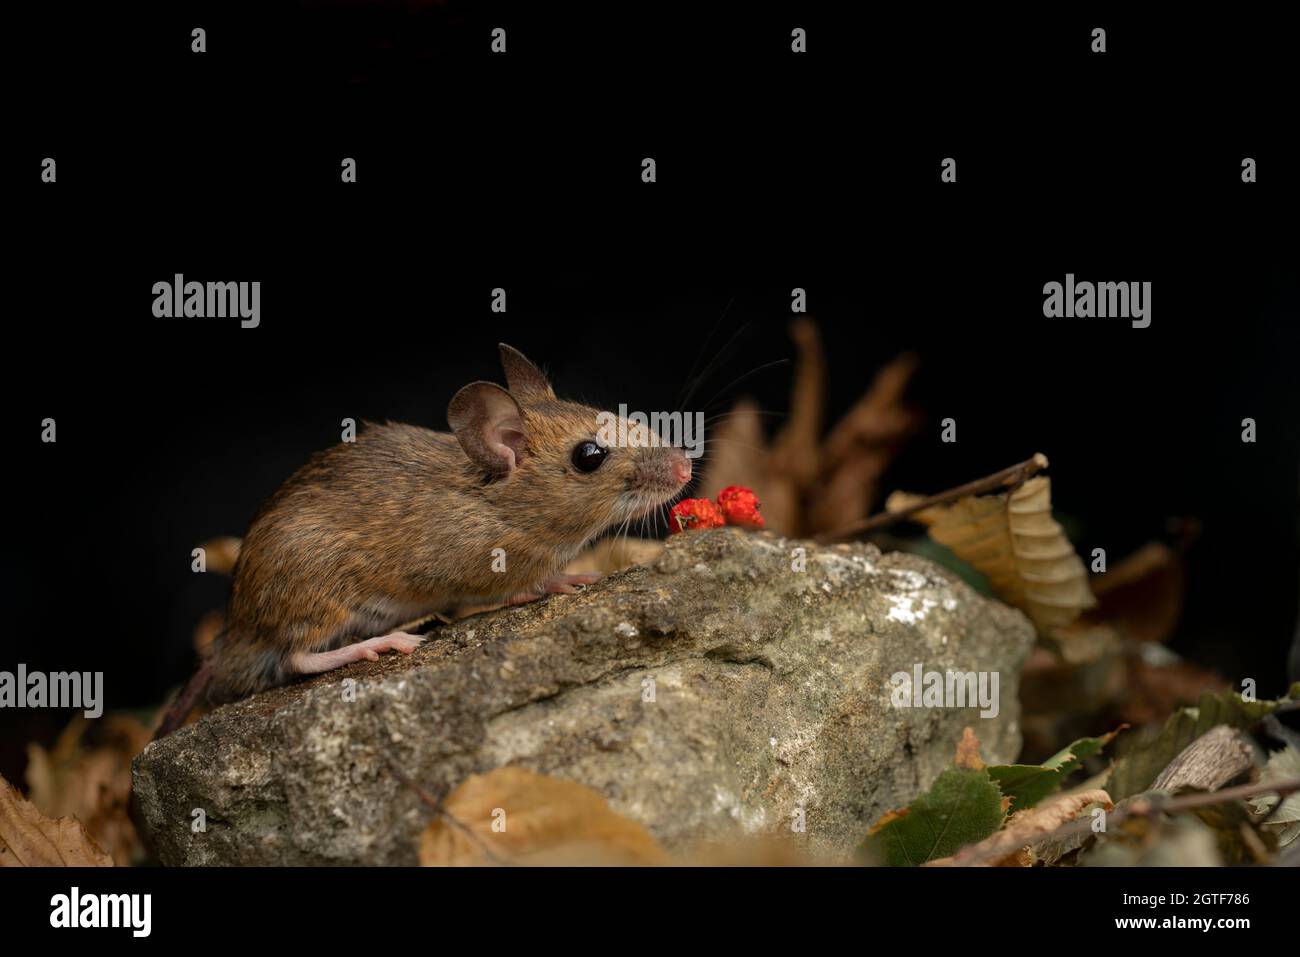 Woodmouse, Apodemus sylvaticus,searching for food, autumn in Oxfordshire. Stock Photo